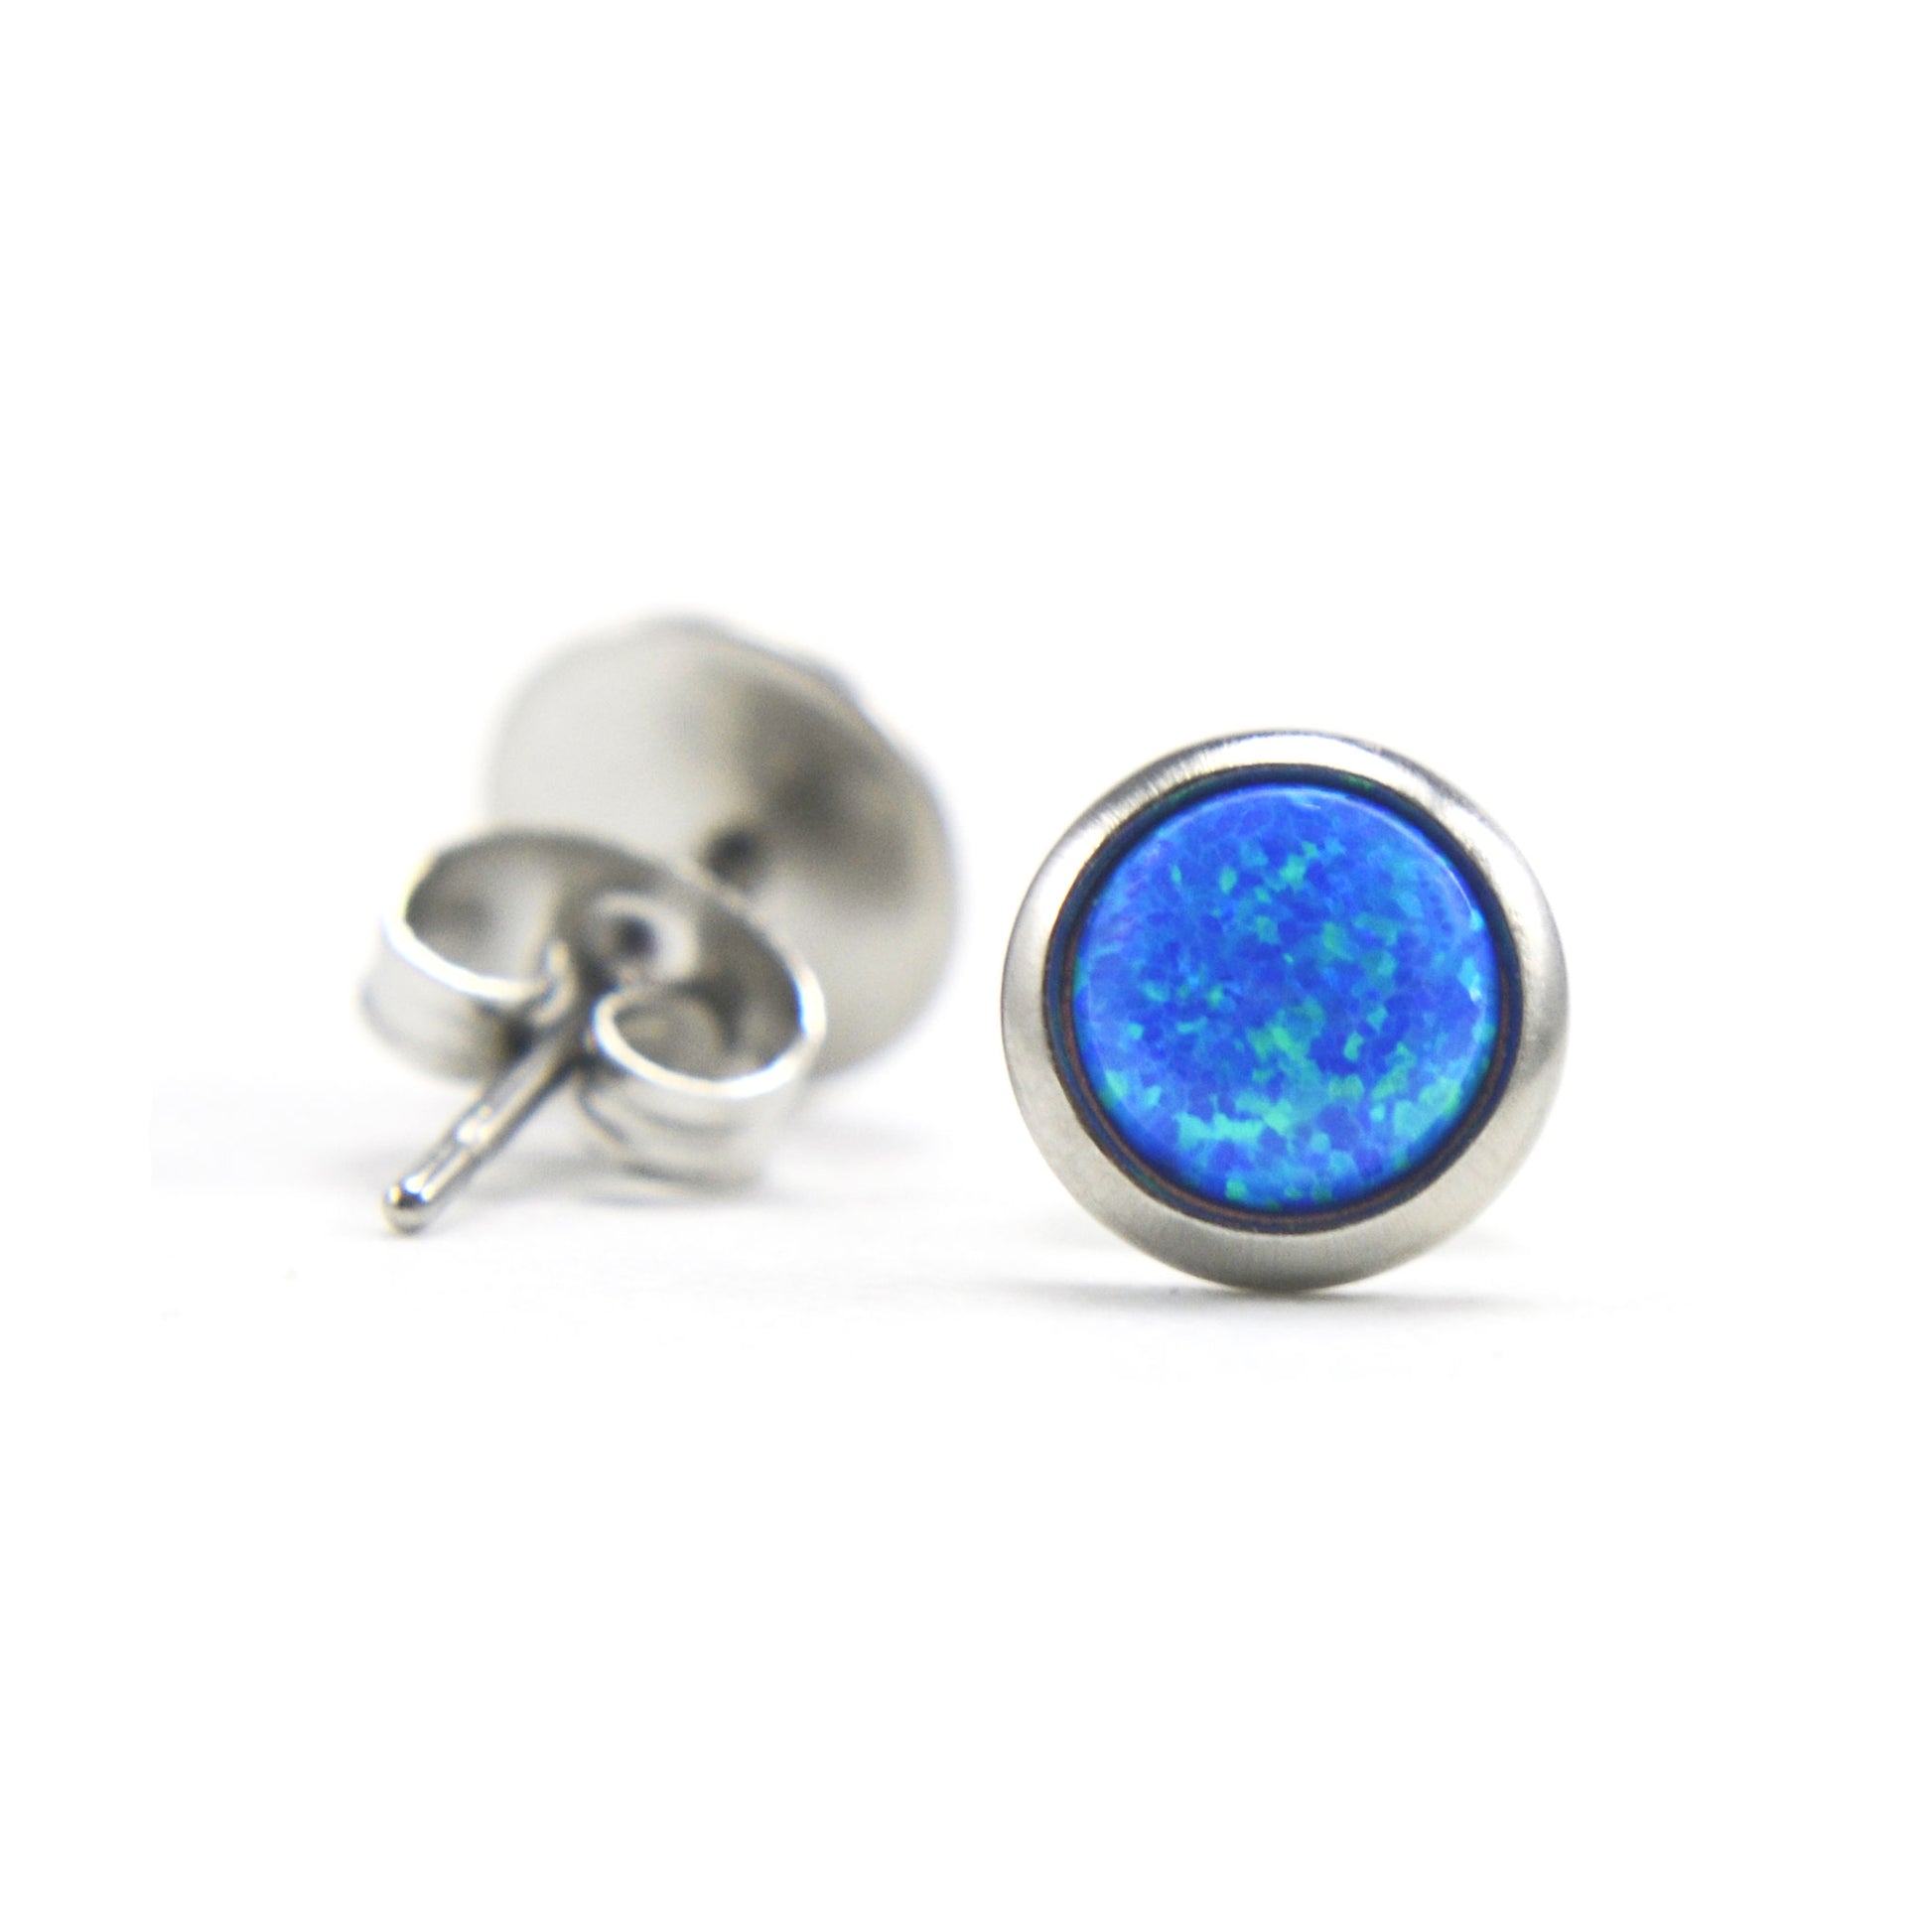 Close up of blue Opal and surgical steel stud earrings on white background